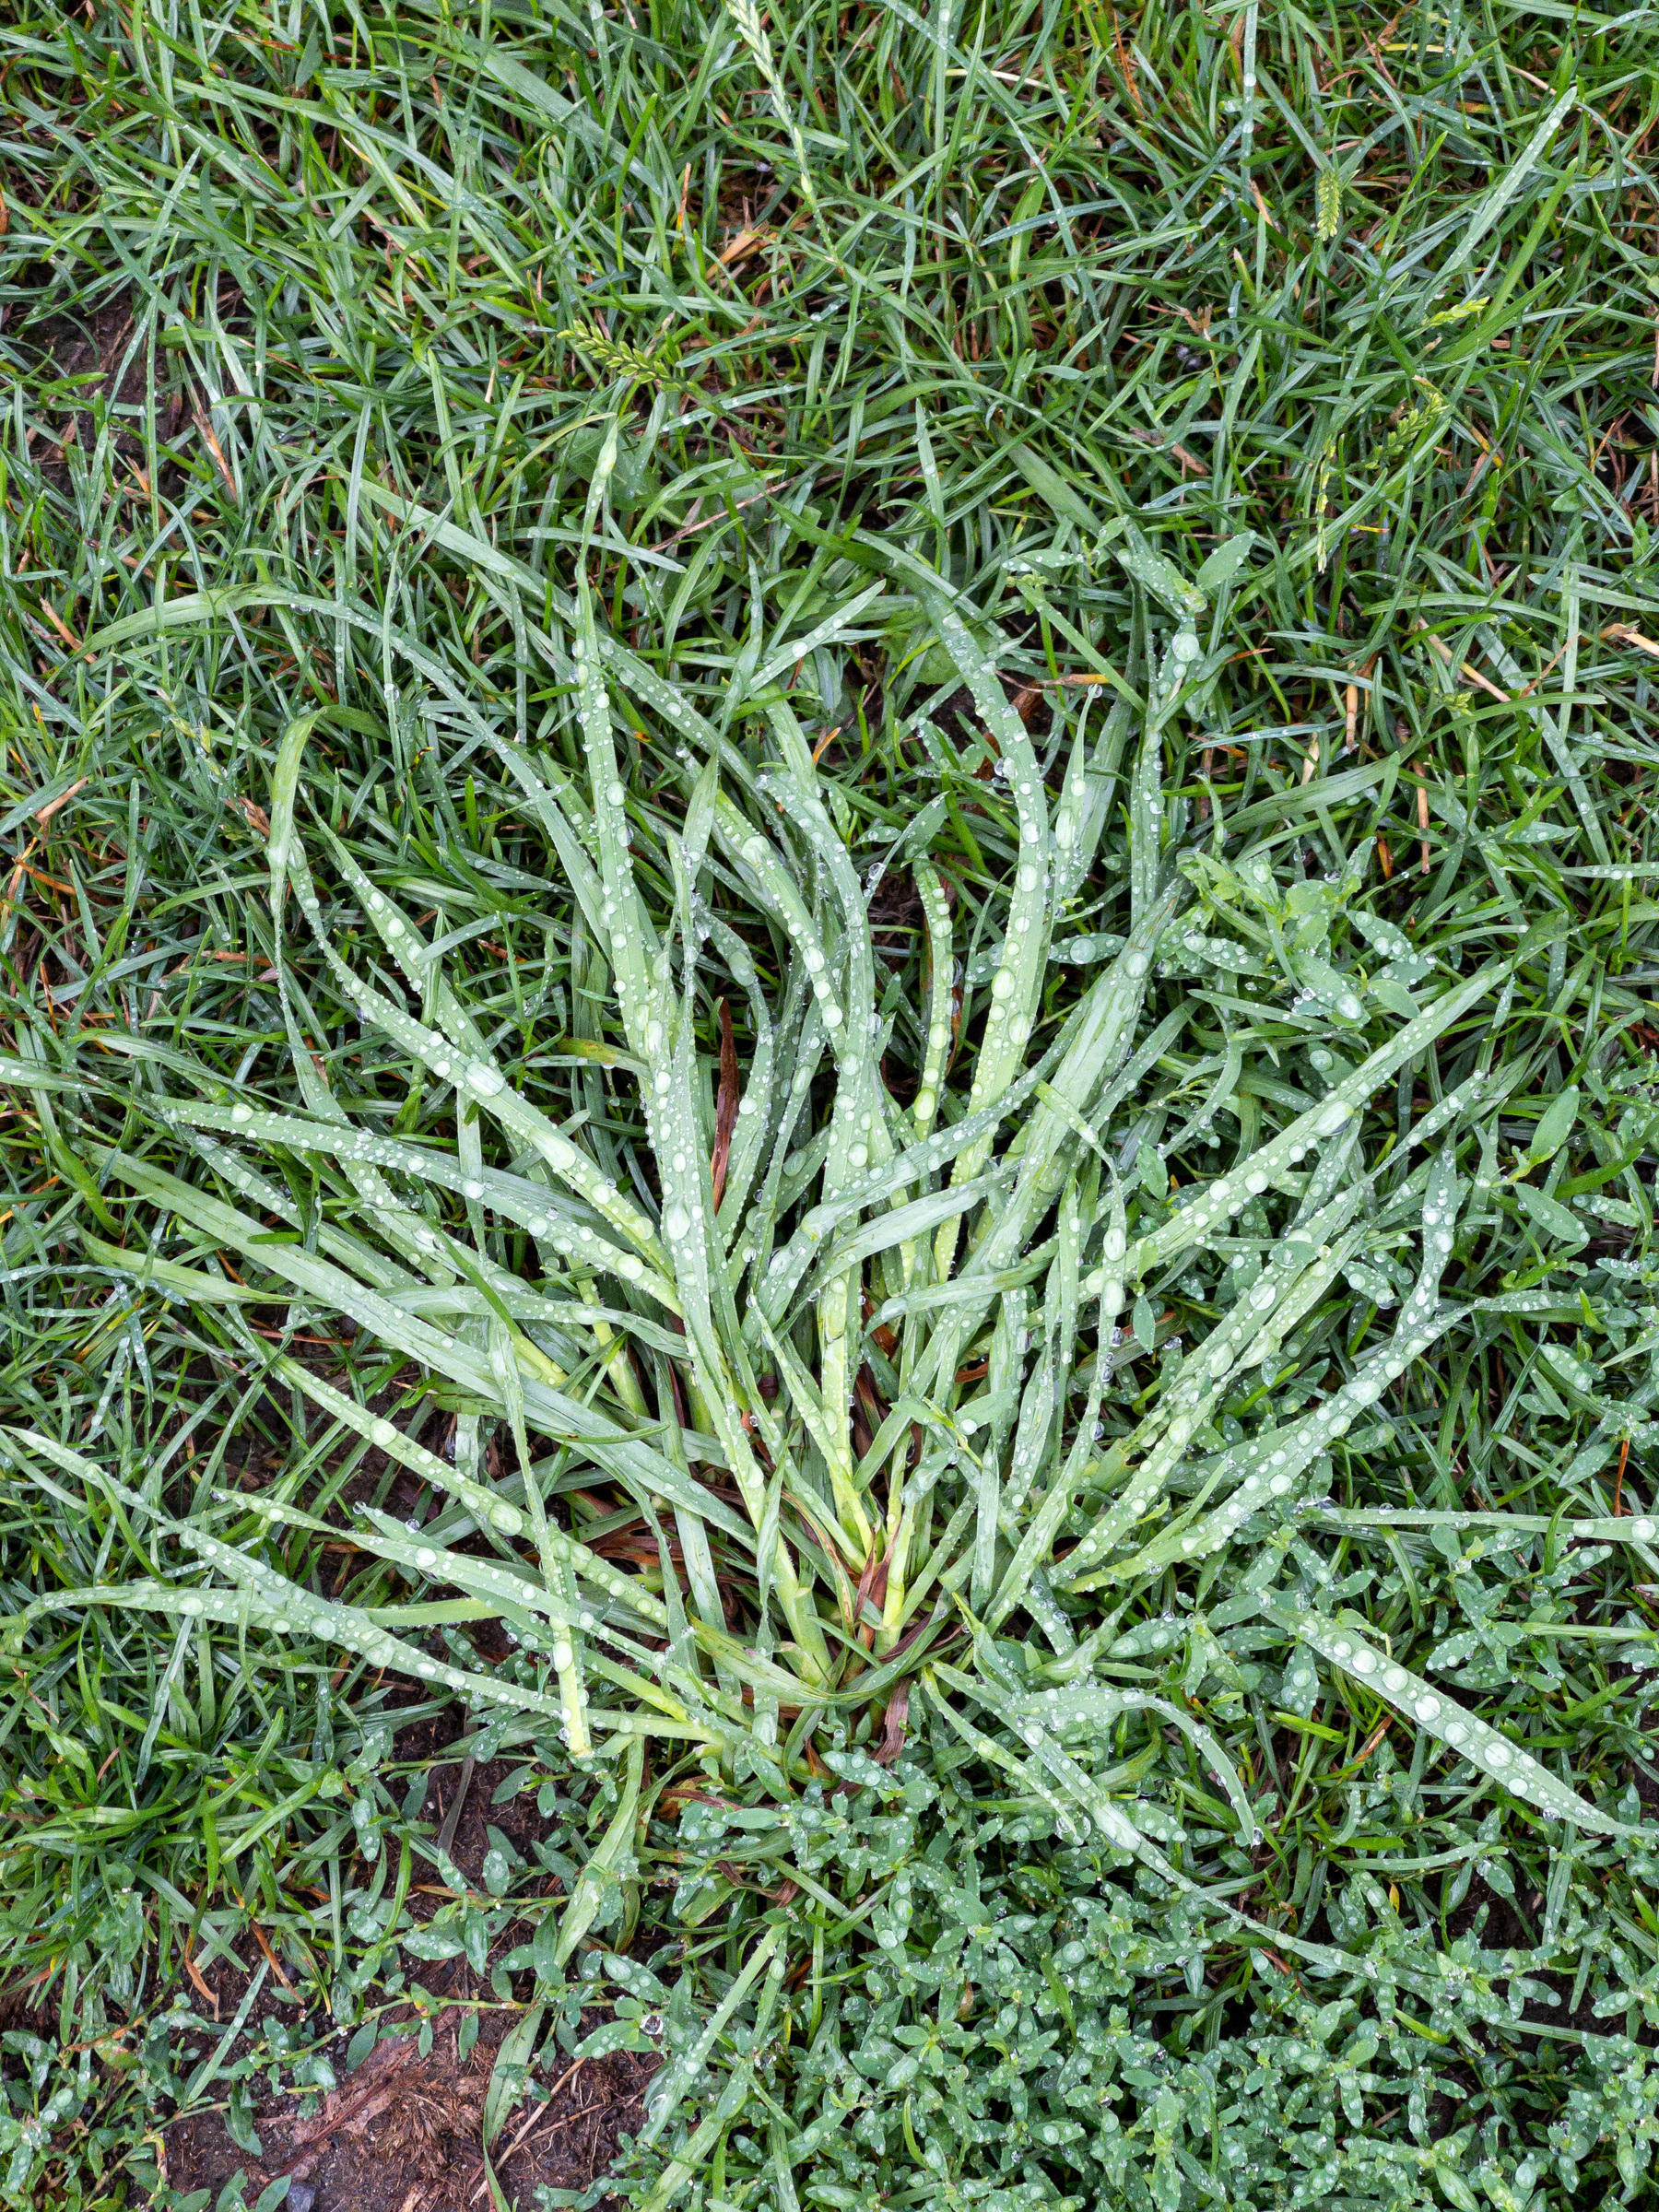 Crab grass with raindrops in the middle of other kinds of grass.